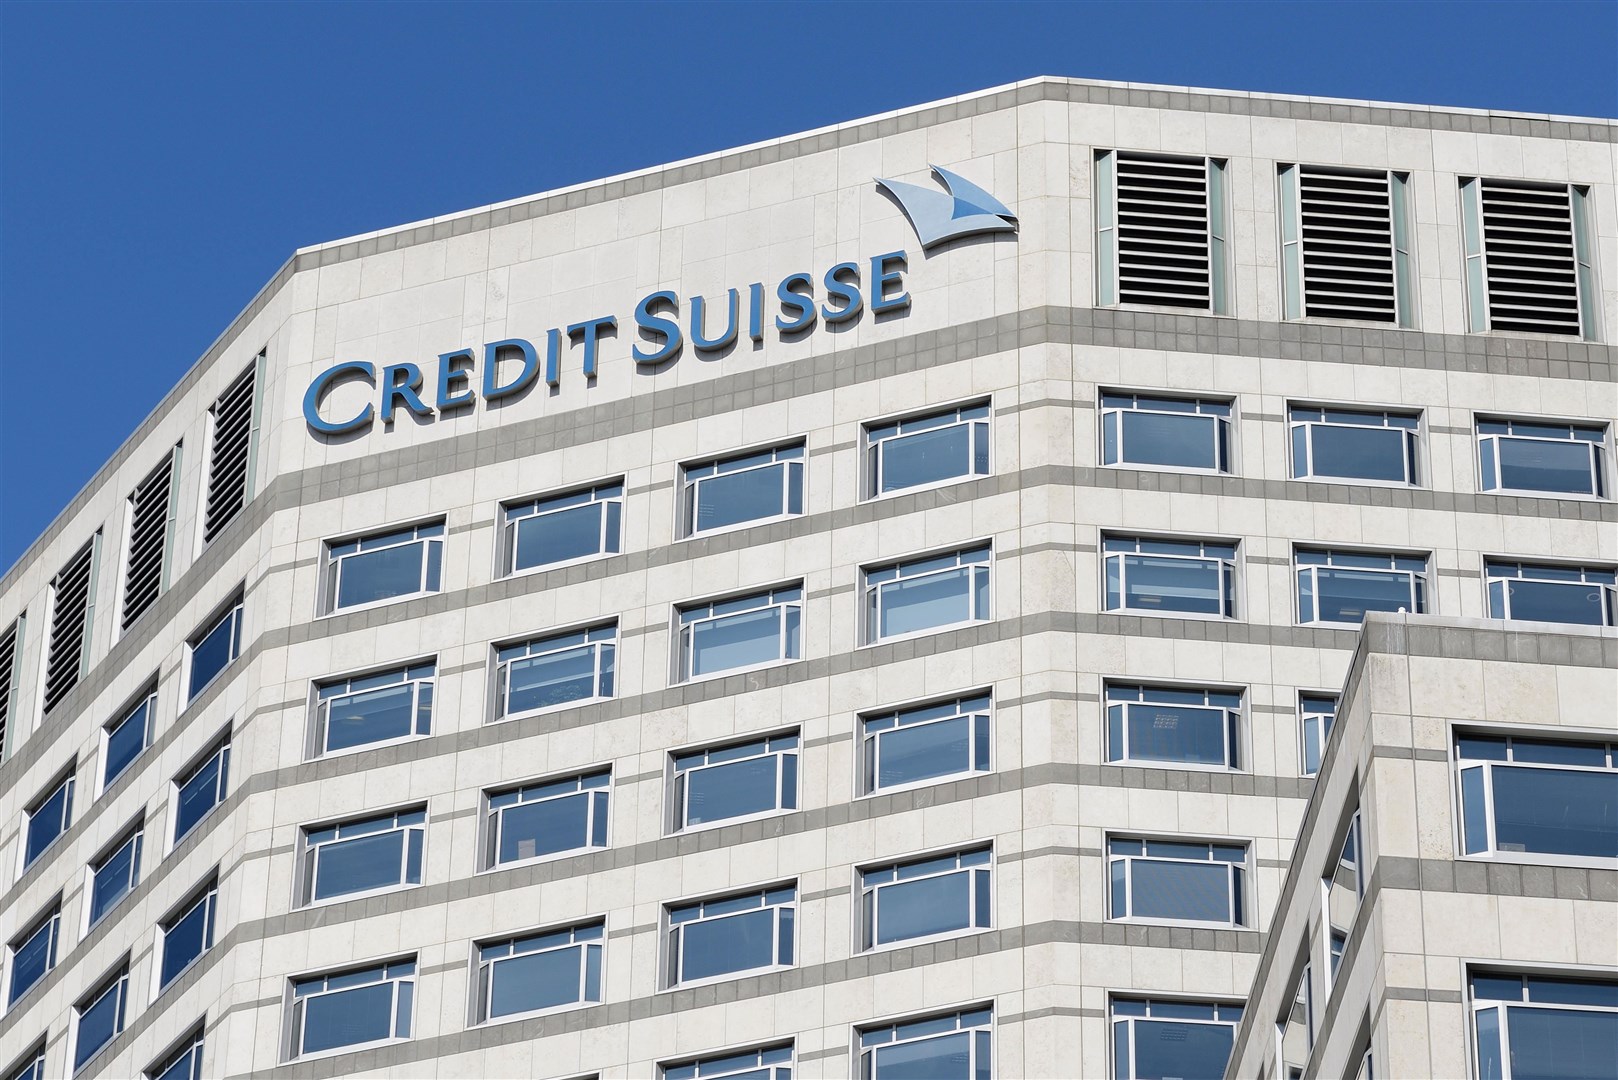 Credit Suisse has fuelled concerns over the robustness of the global banking sector (Alamy/PA)